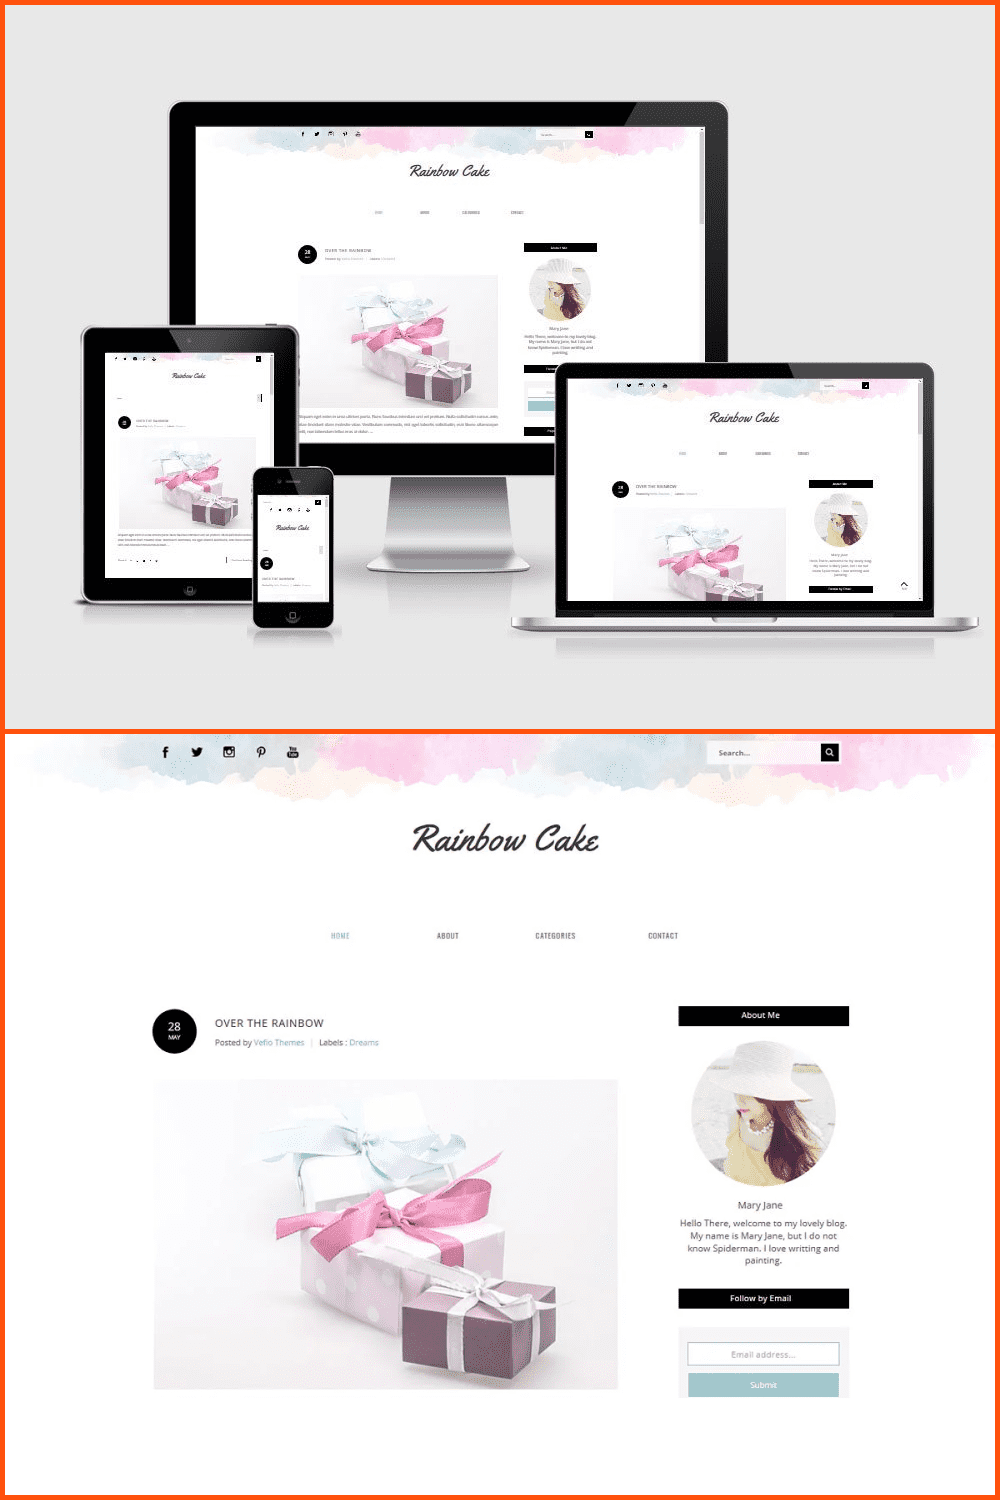 Pages of theme in pastel tones.